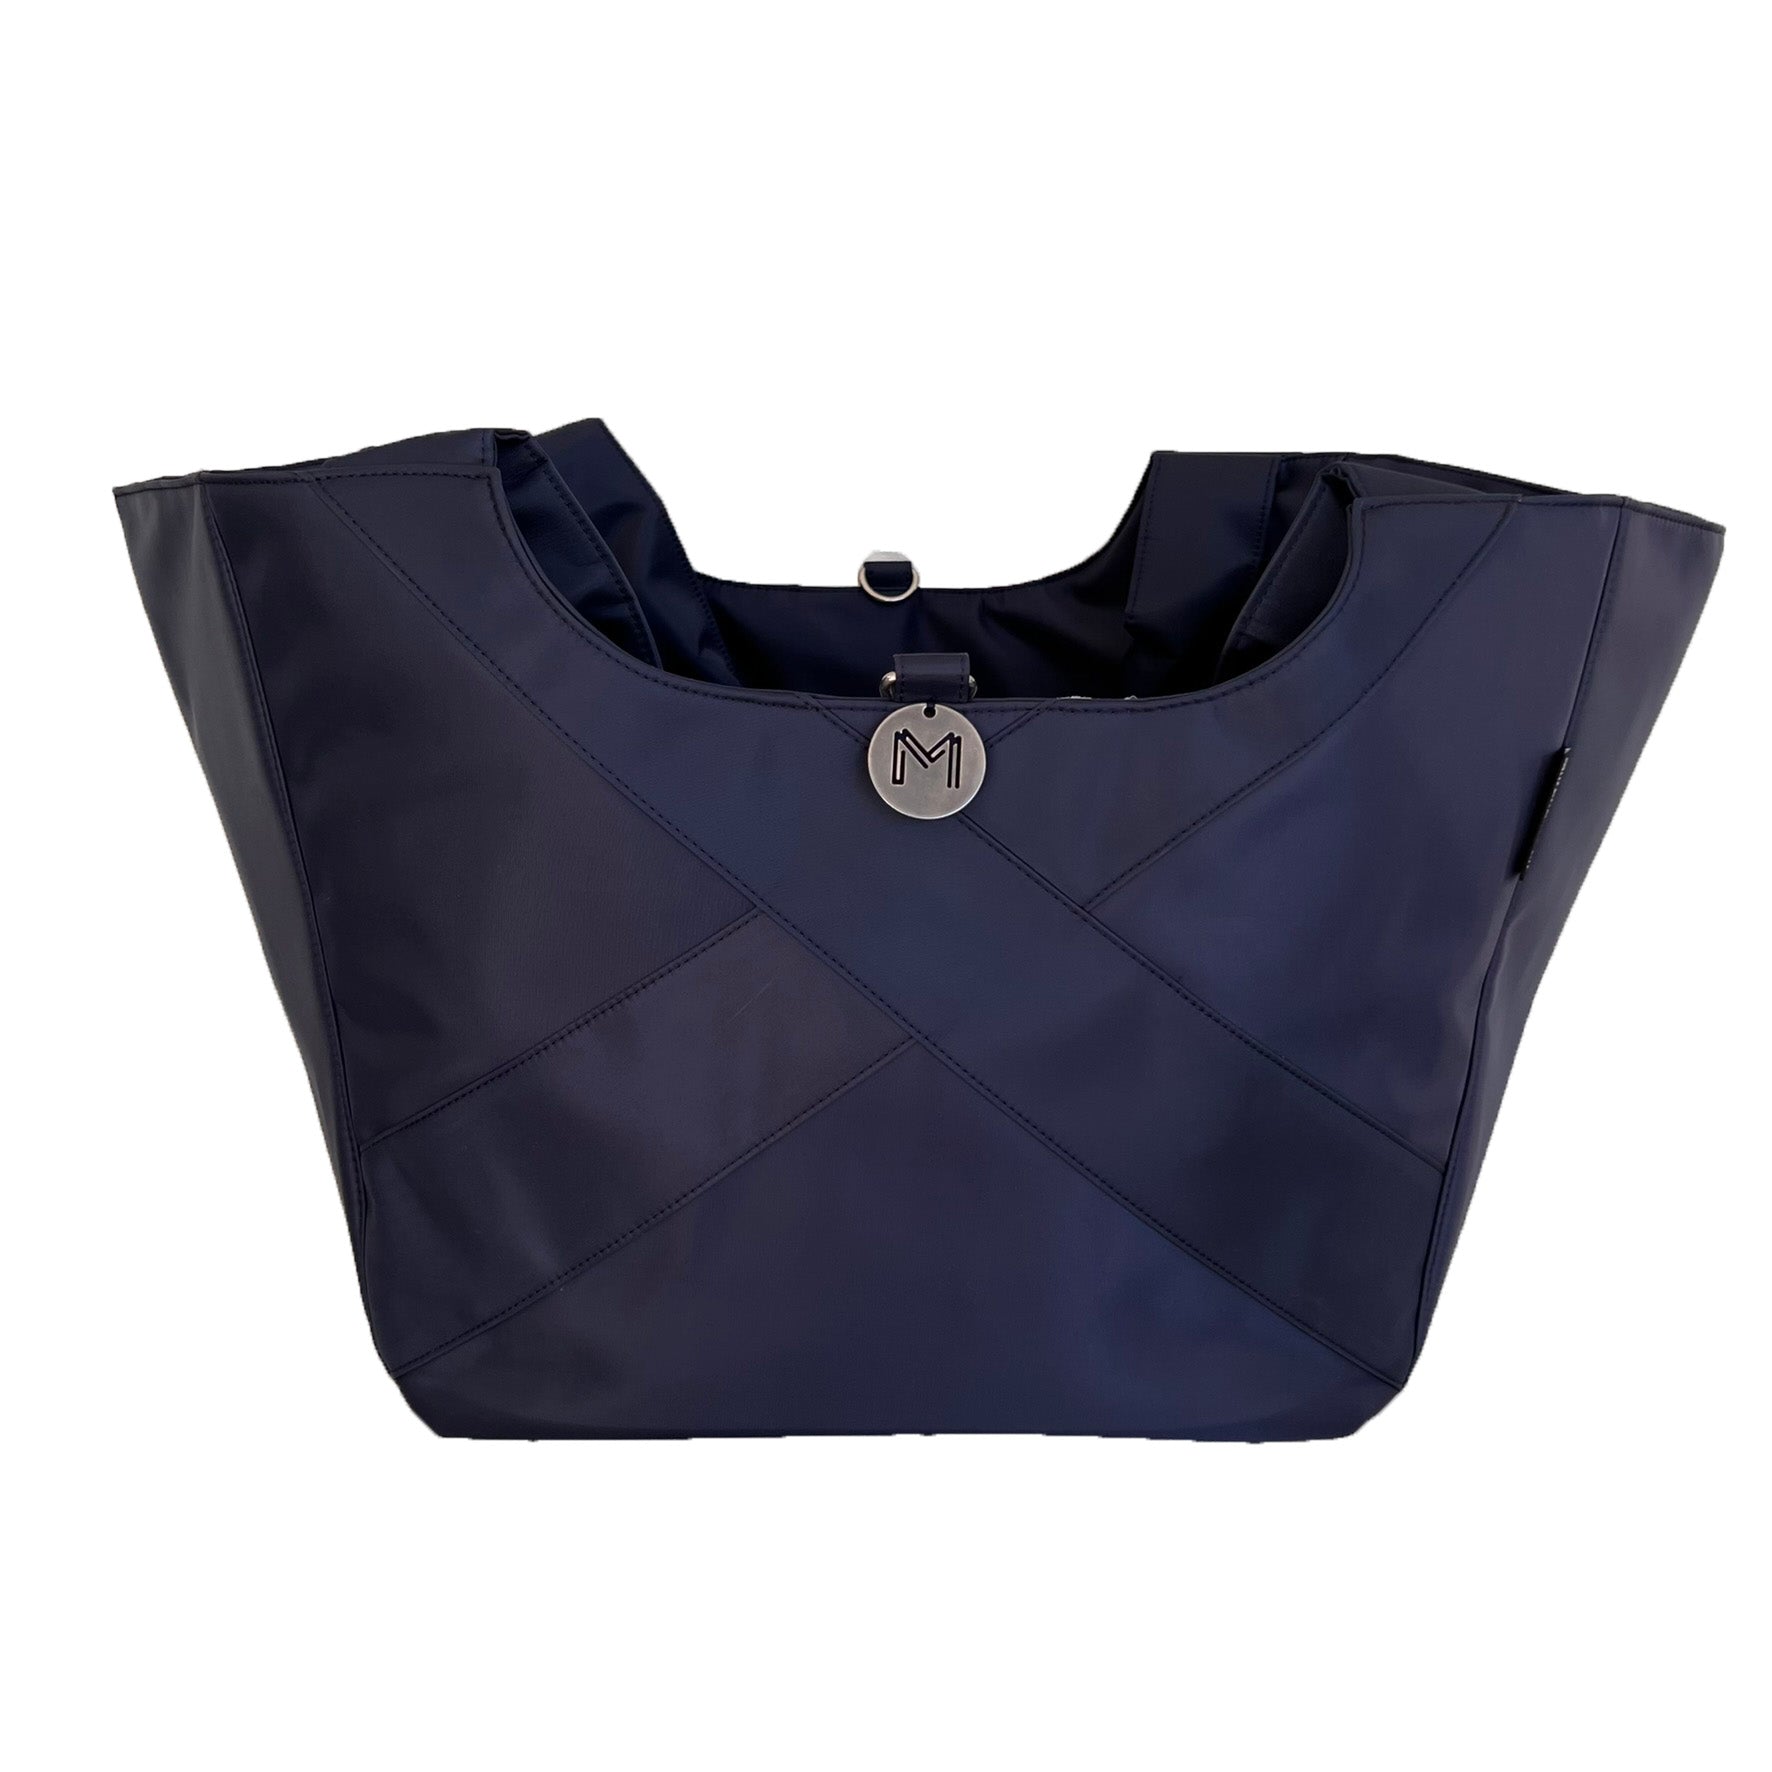 Cove Carry-all - Mirabilis Navy Blue (SOLD OUT)